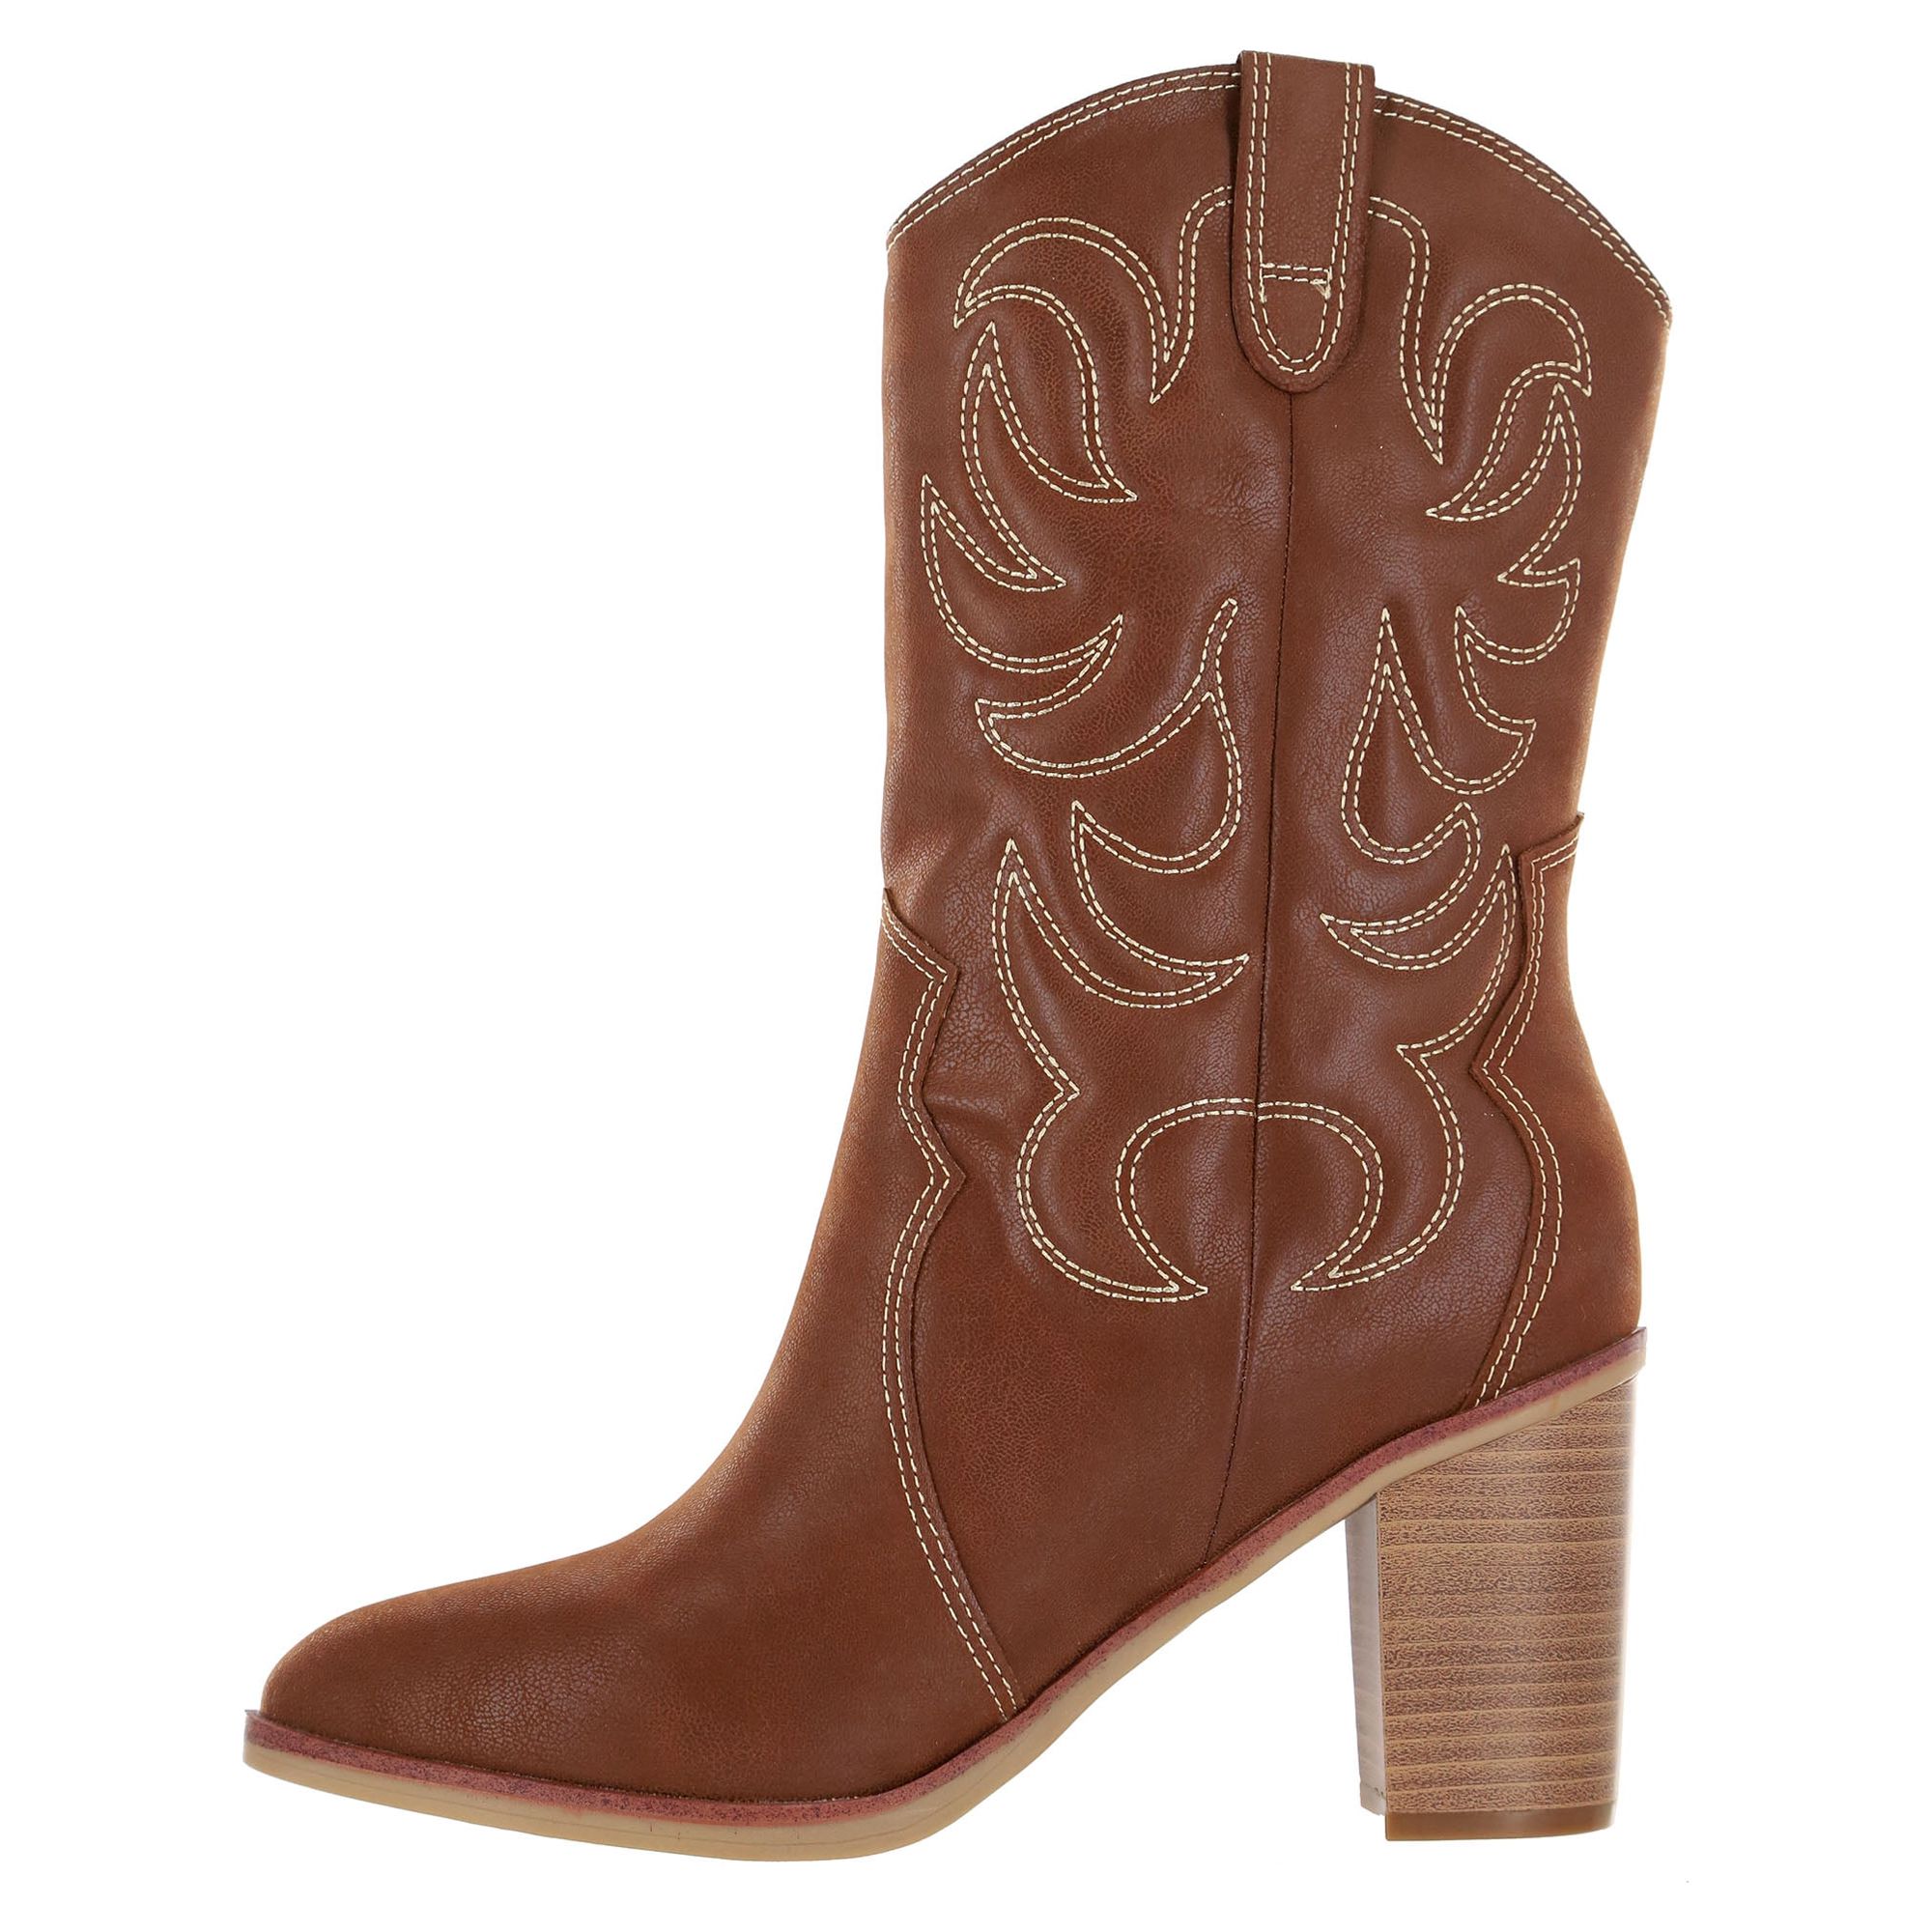 The Pioneer Woman Embroidered Mid-Calf Western Boots, Women's - image 3 of 6